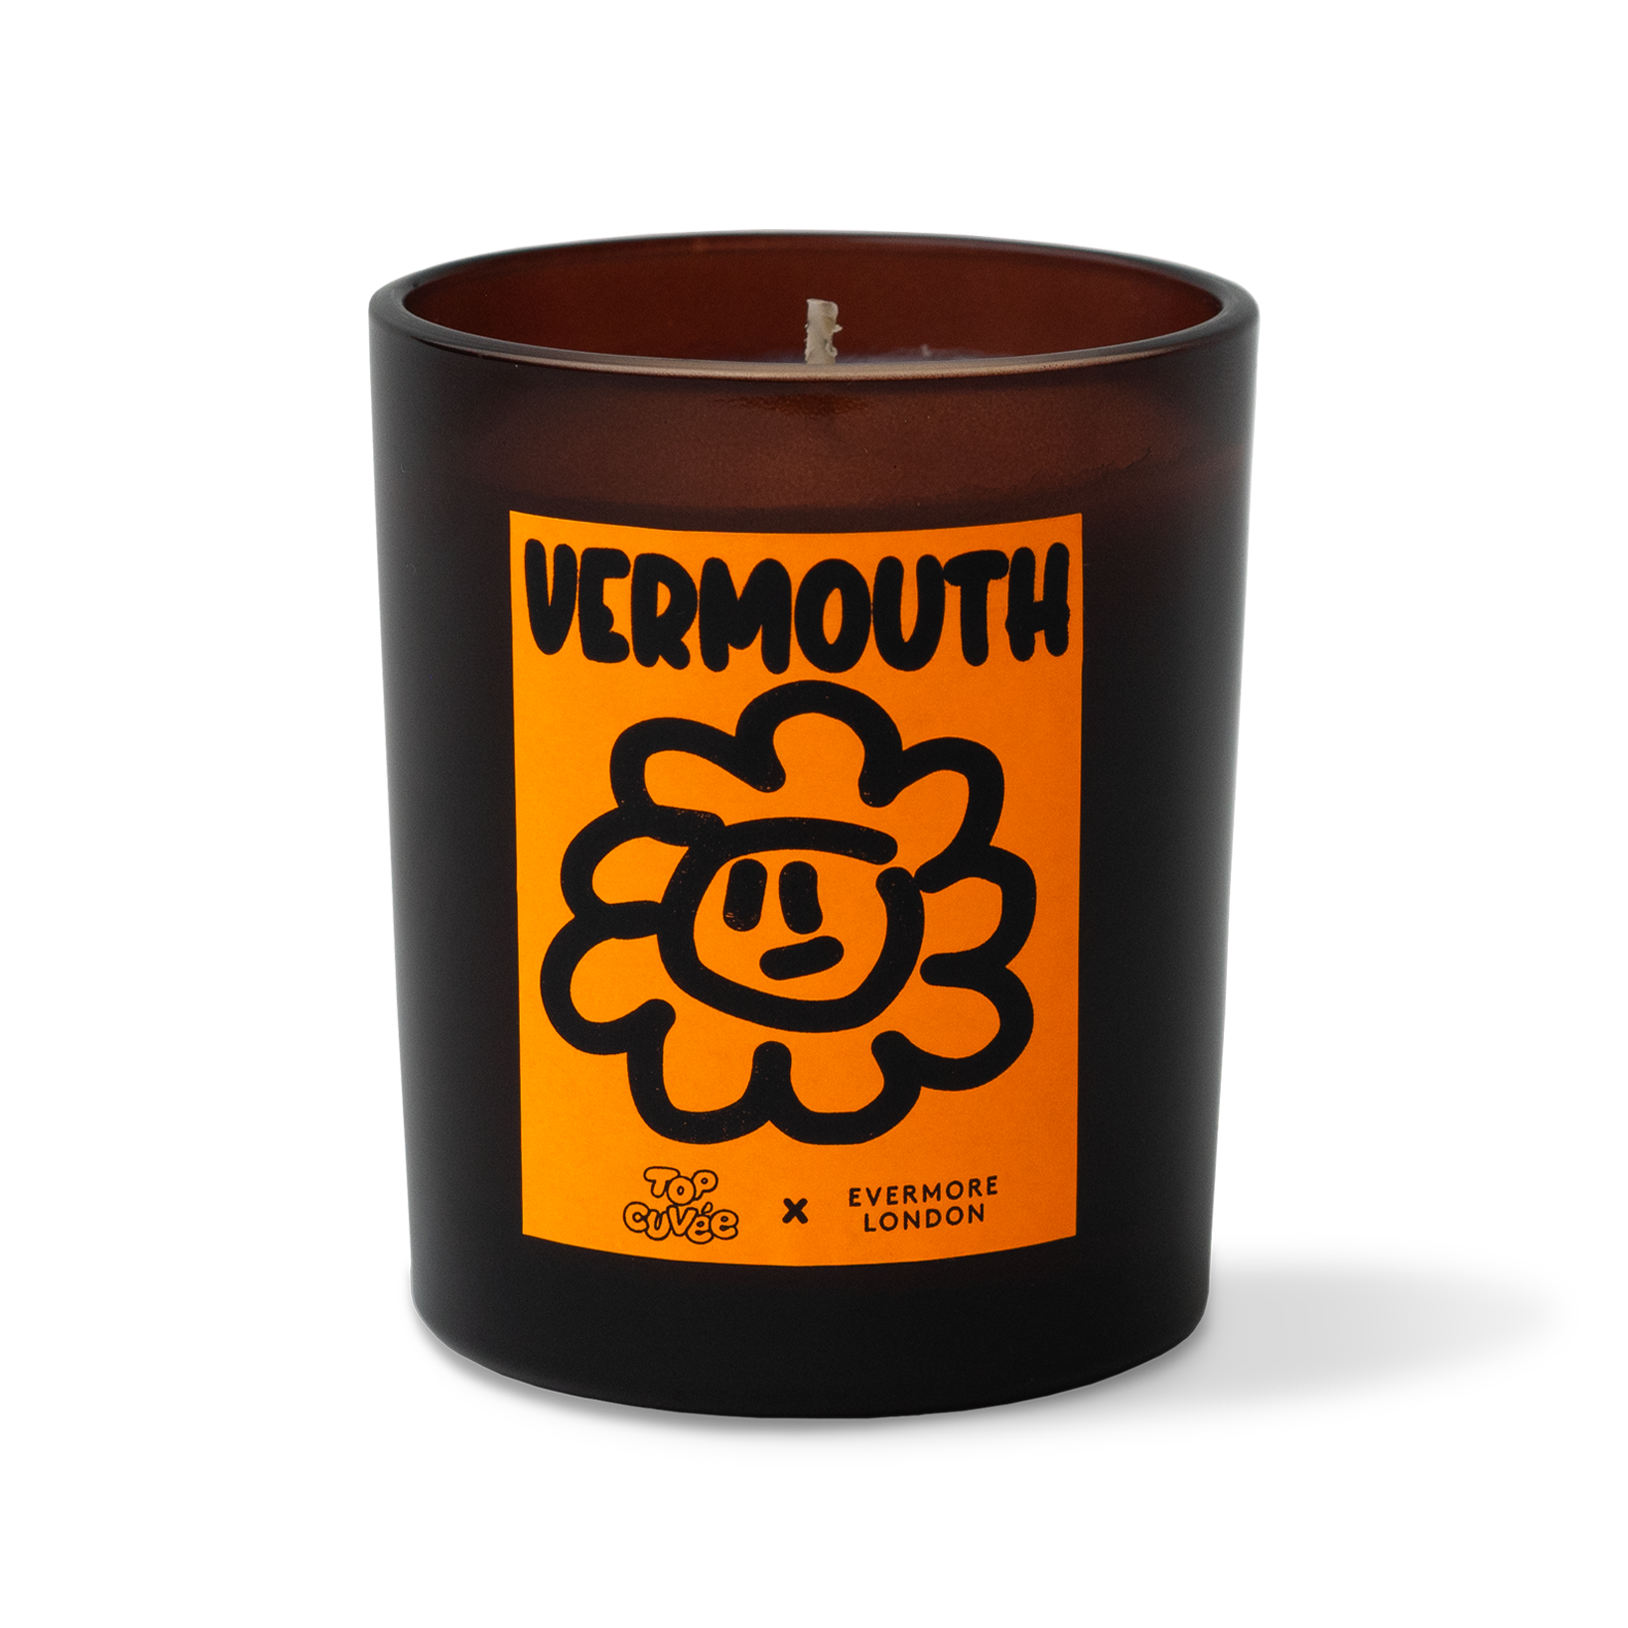 Top Cuvee x Evermore Vermouth candle